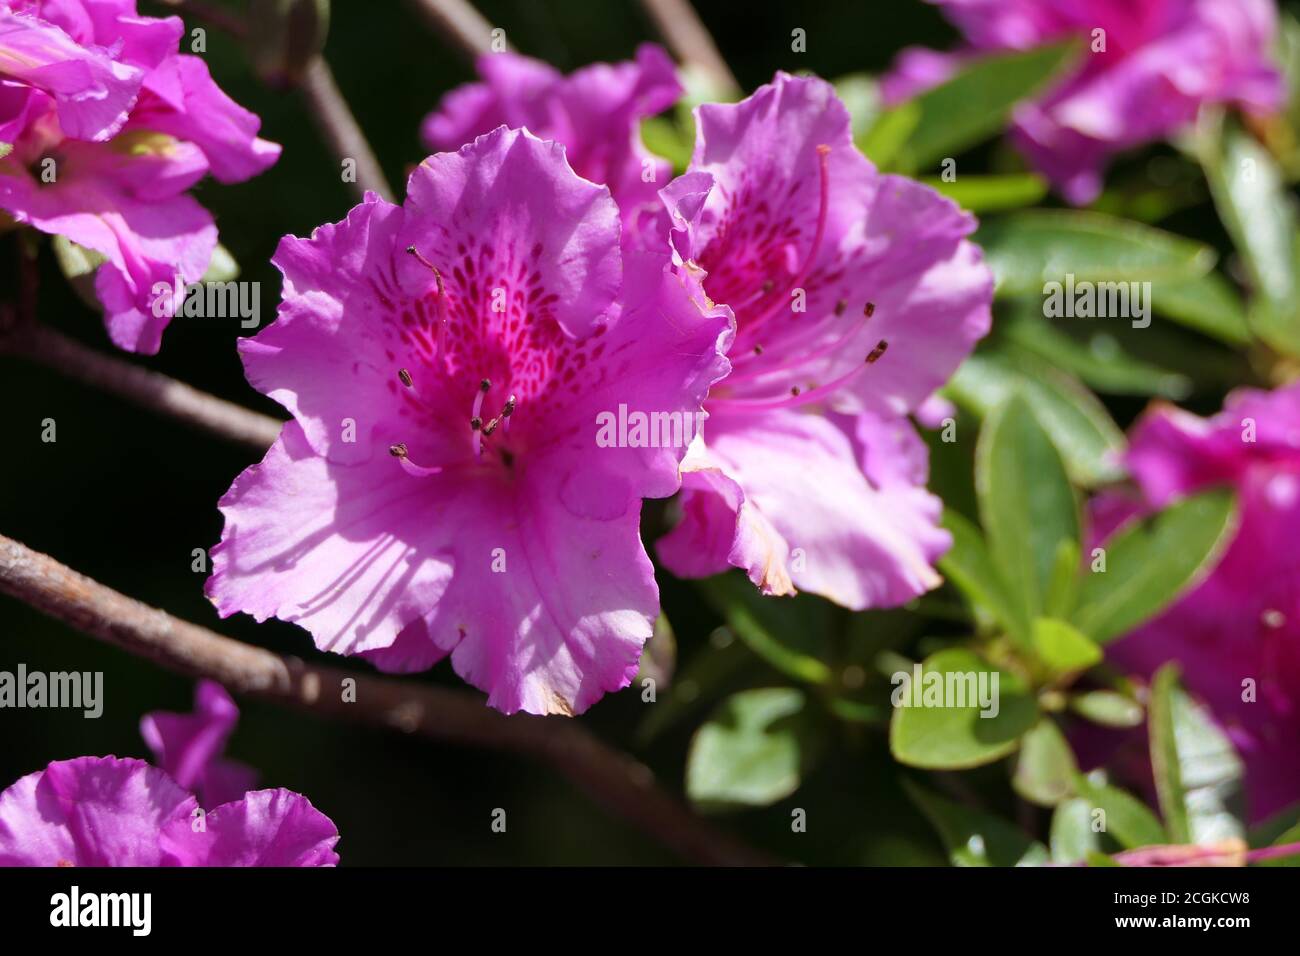 Closeup blossom of a pink rhododendron in full bloom in summer Stock Photo